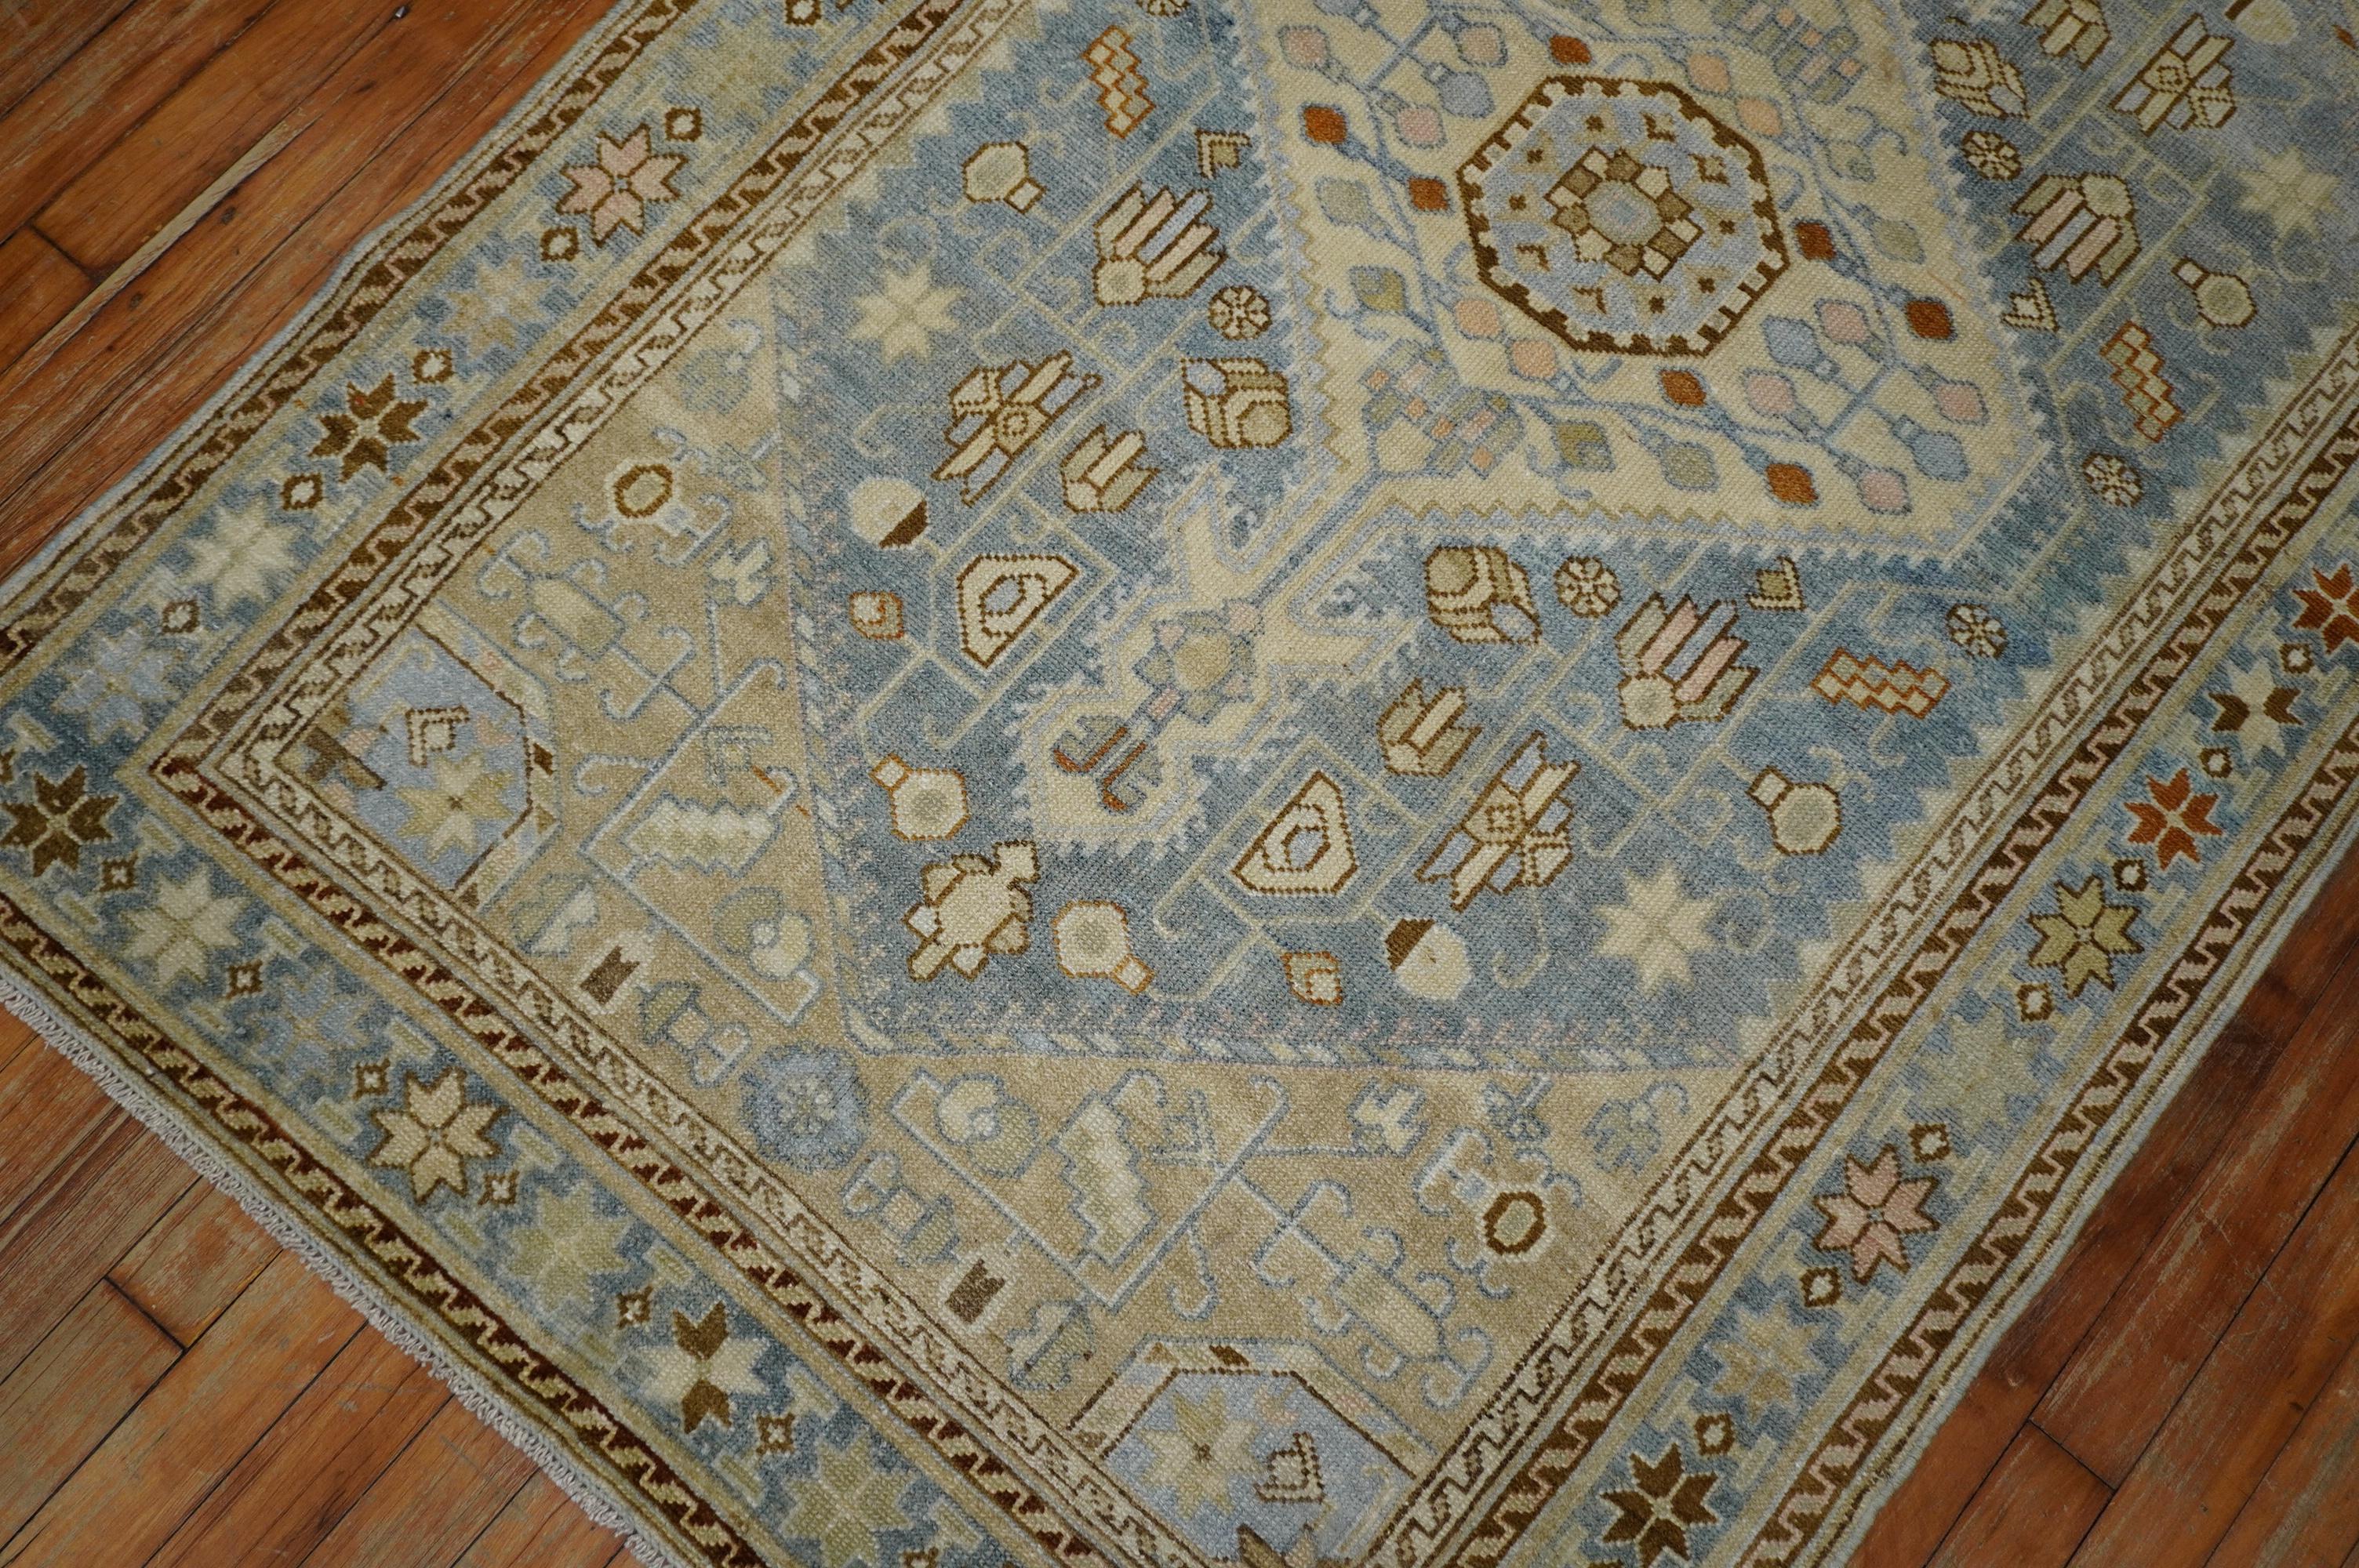 Highly decorative antique early 20th century Persian Malayer rug. Light blue field with dominant accents in ivory and beige with some brown and oatmeal outlines, circa 1940.

Measures: 3'7” x 5'9”.

       